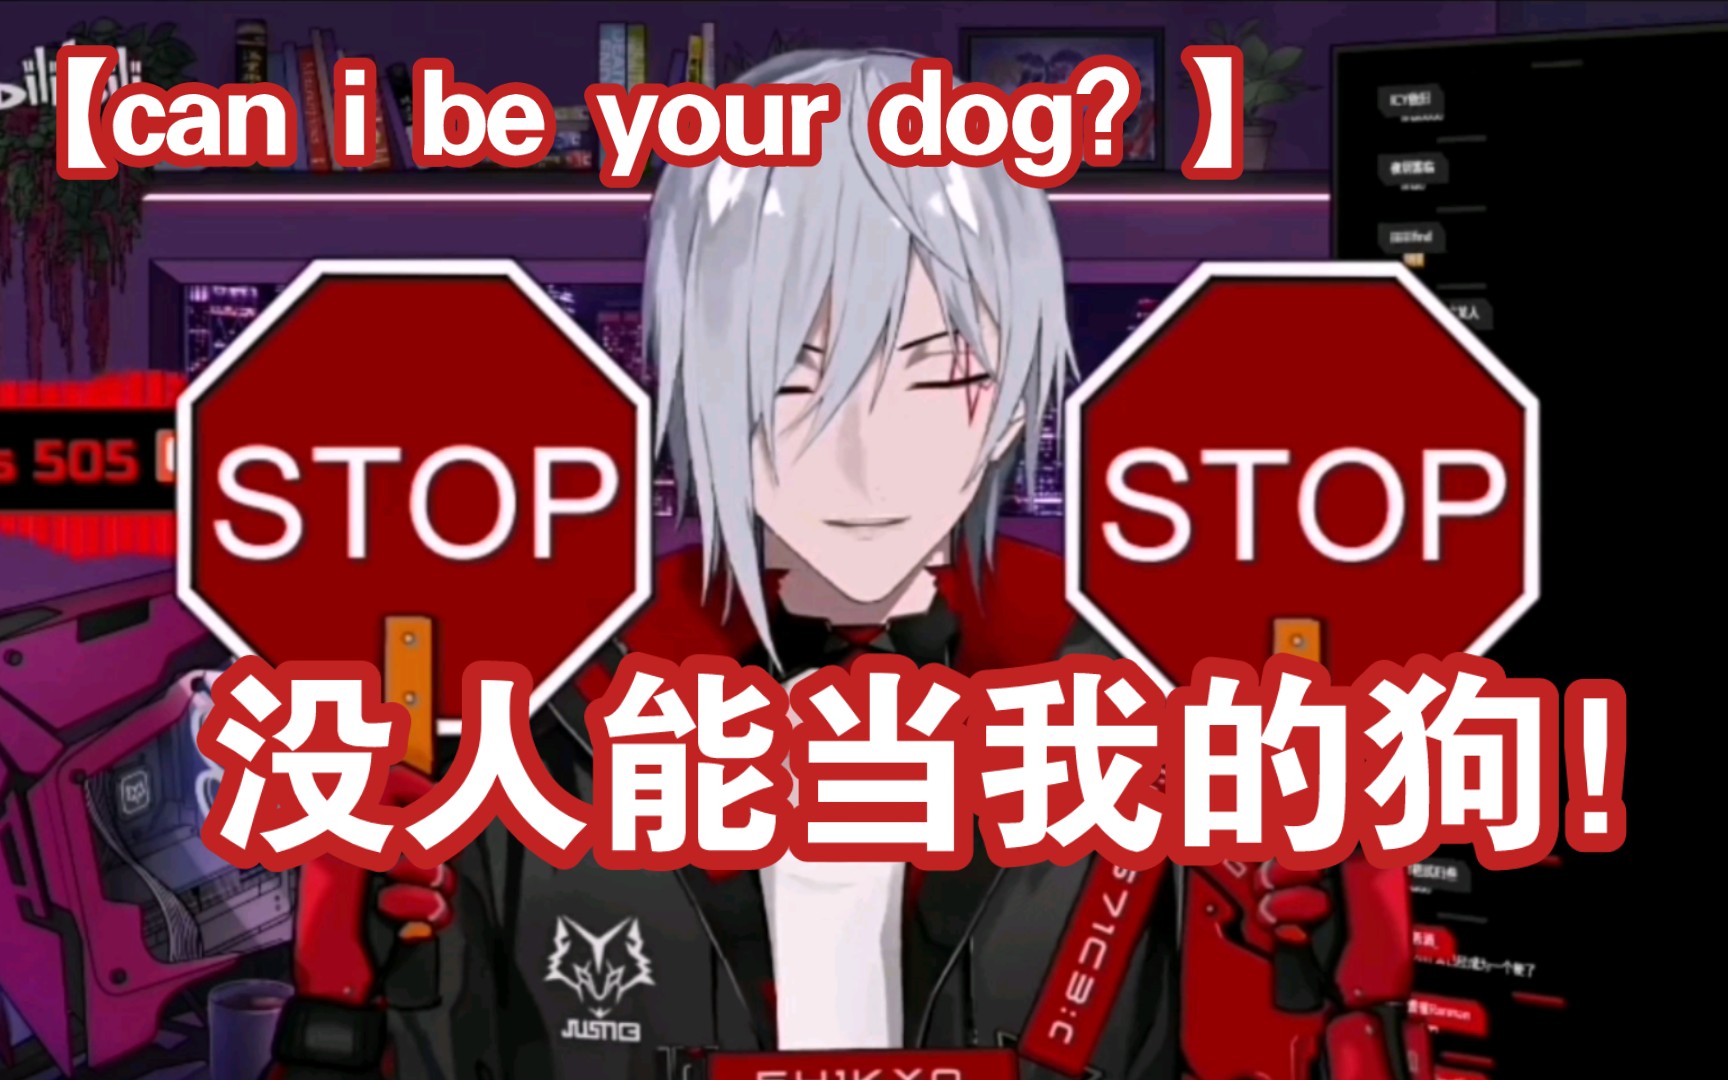 【fulgur｜B限｜熟切】“Can i be your dog？”